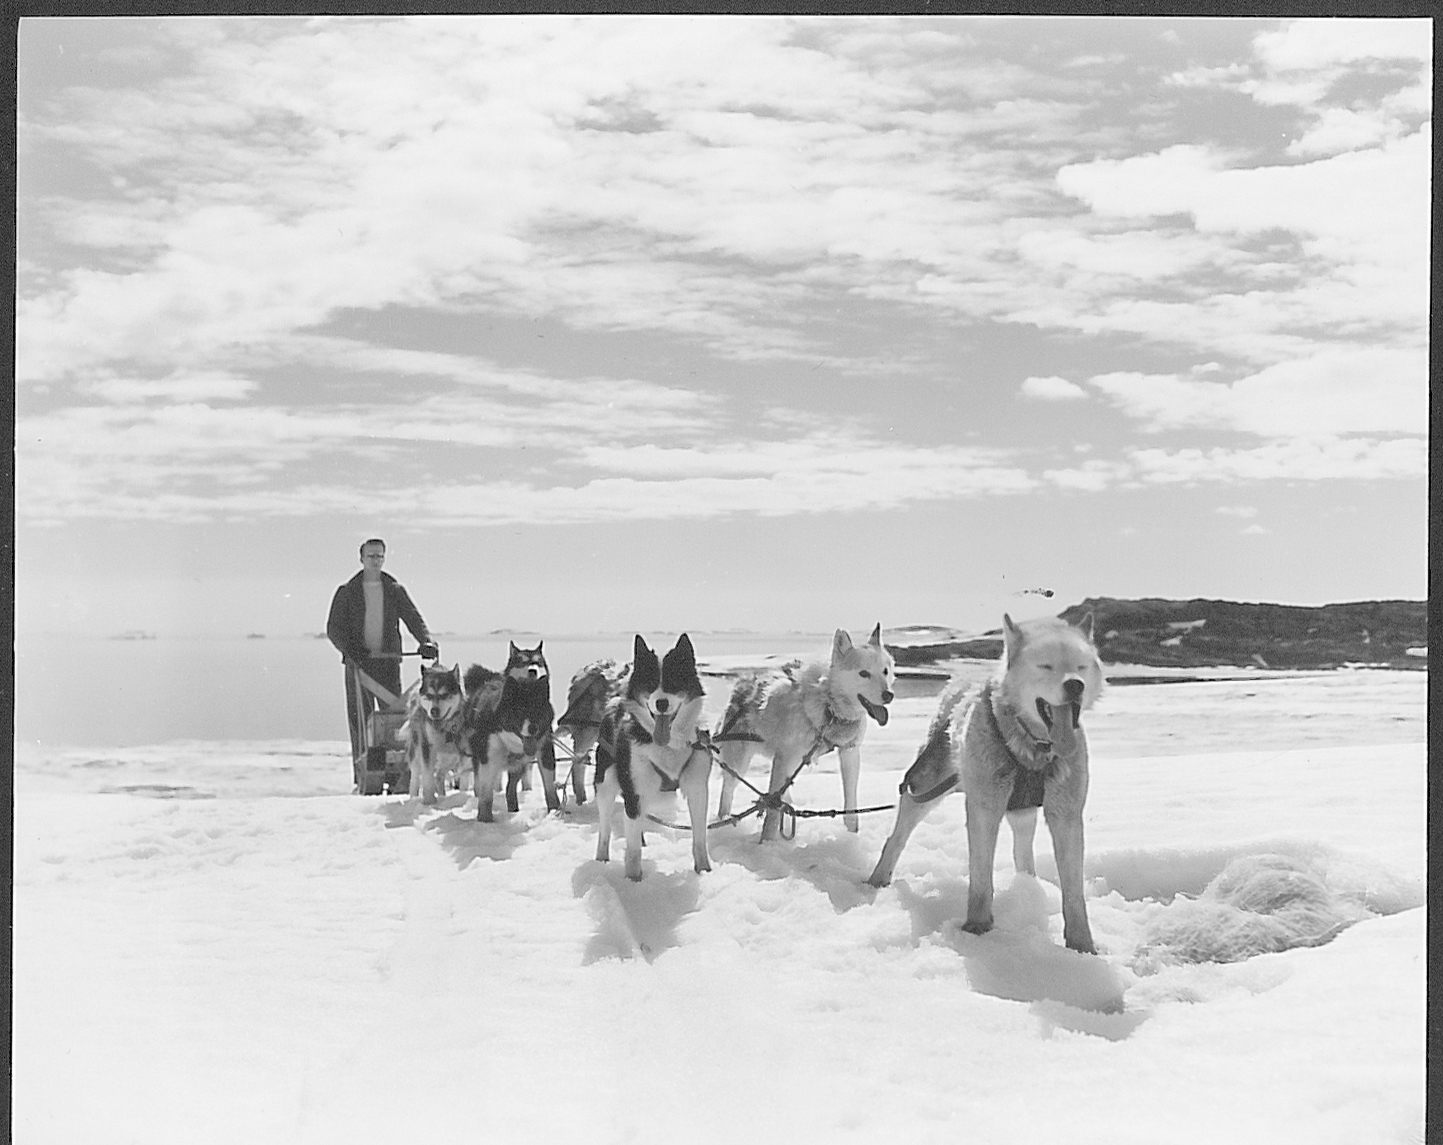 A team of sled dogs and their handler in the snow.